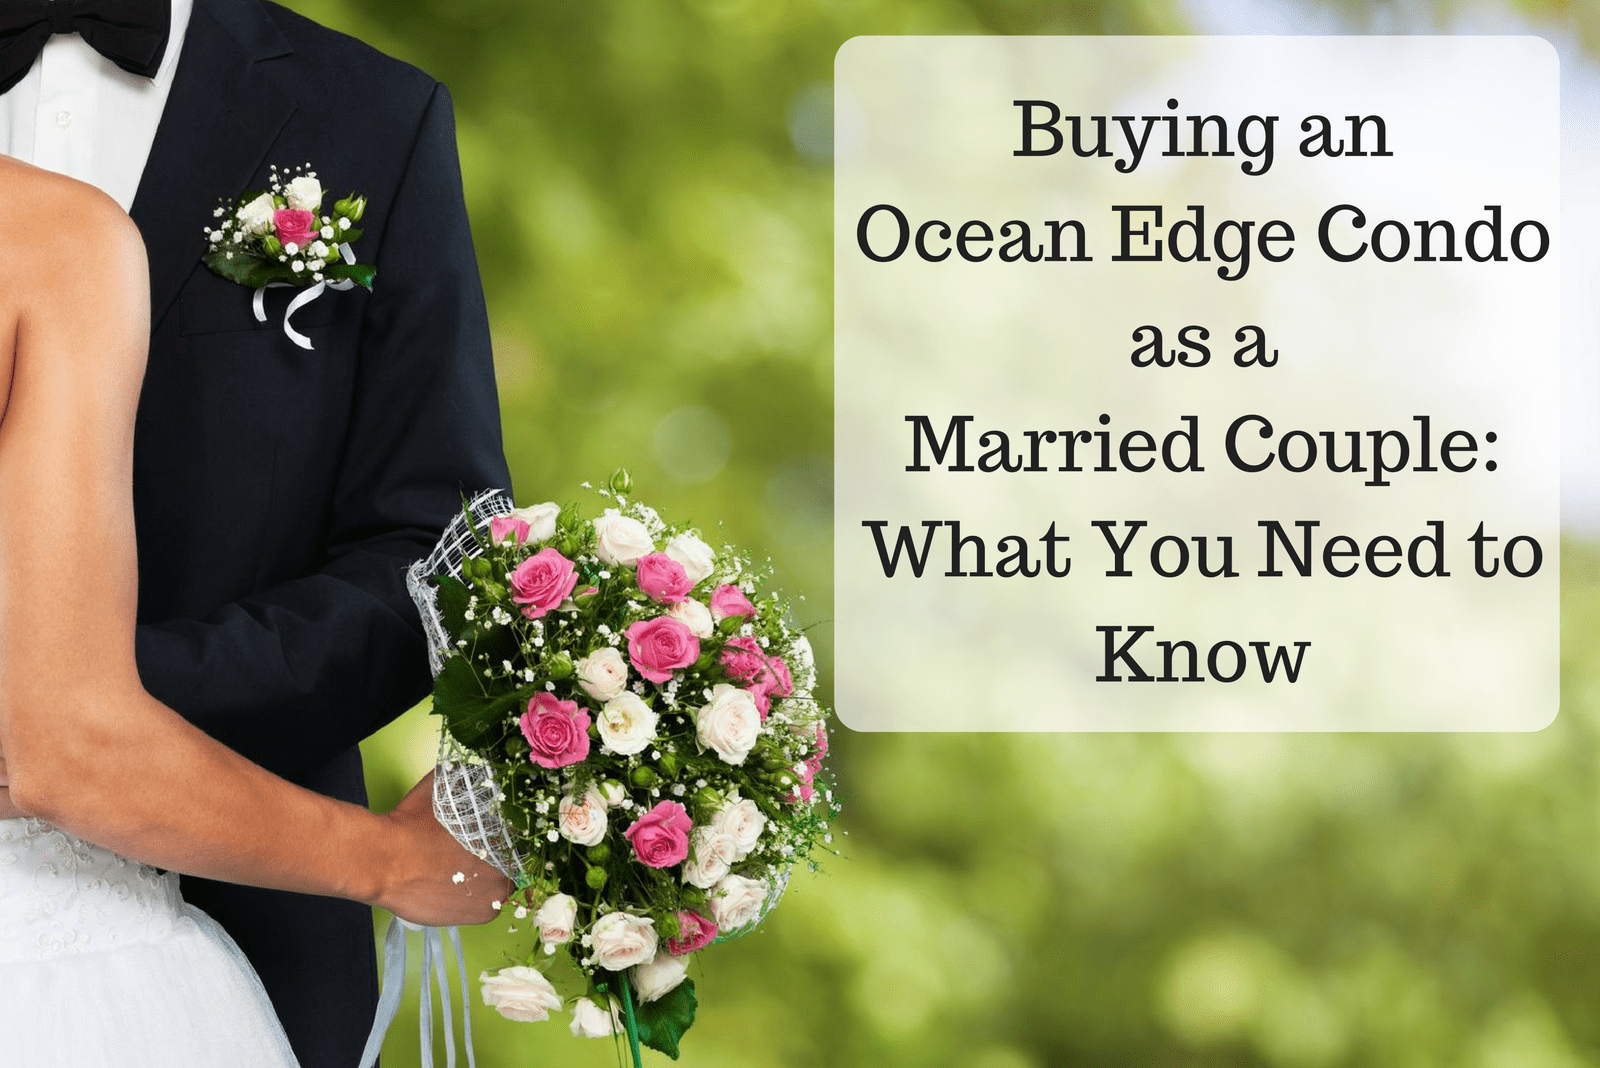 Buying an Ocean Edge Condo as a Married Couple: What You Need to Know